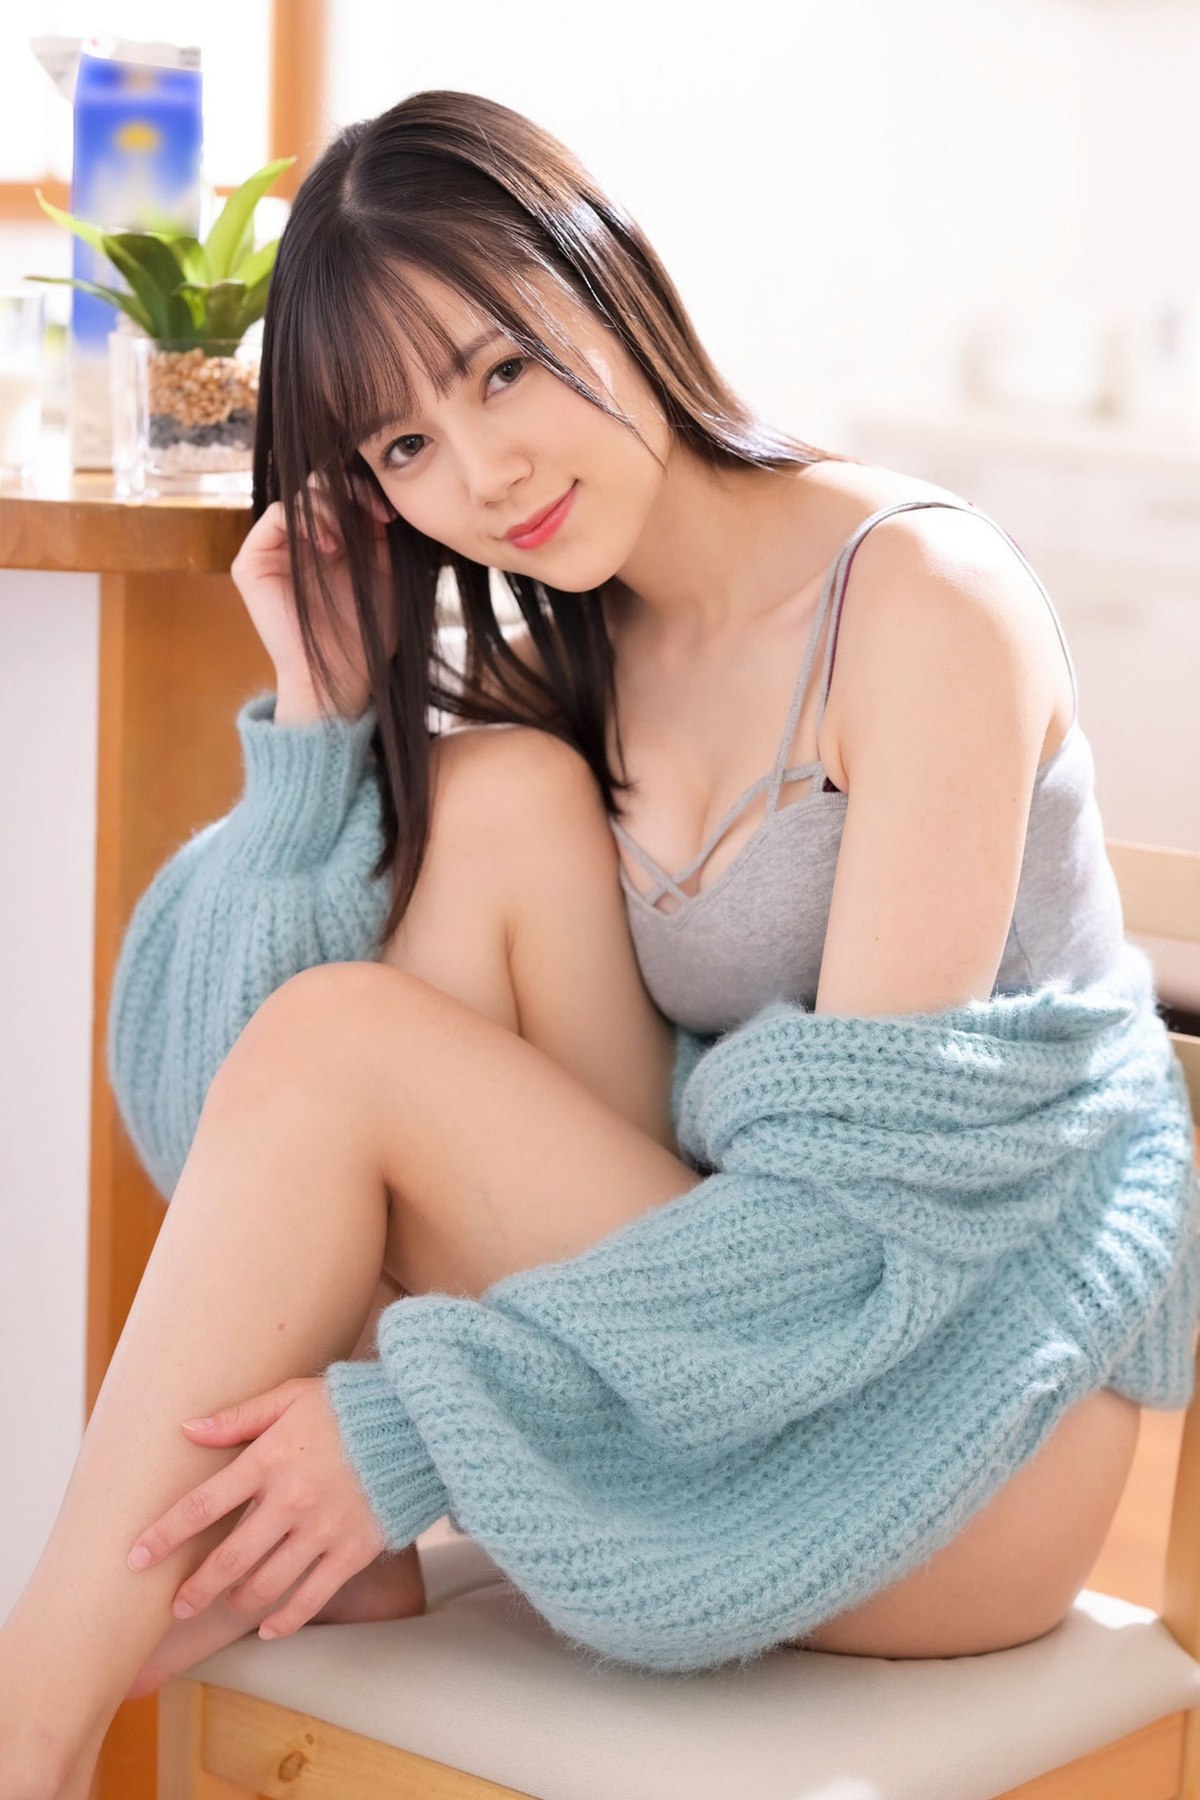 Photobook Remu Suzumori 涼森れむ Ejaculates And Lives Together A 0042 0959739937.jpg